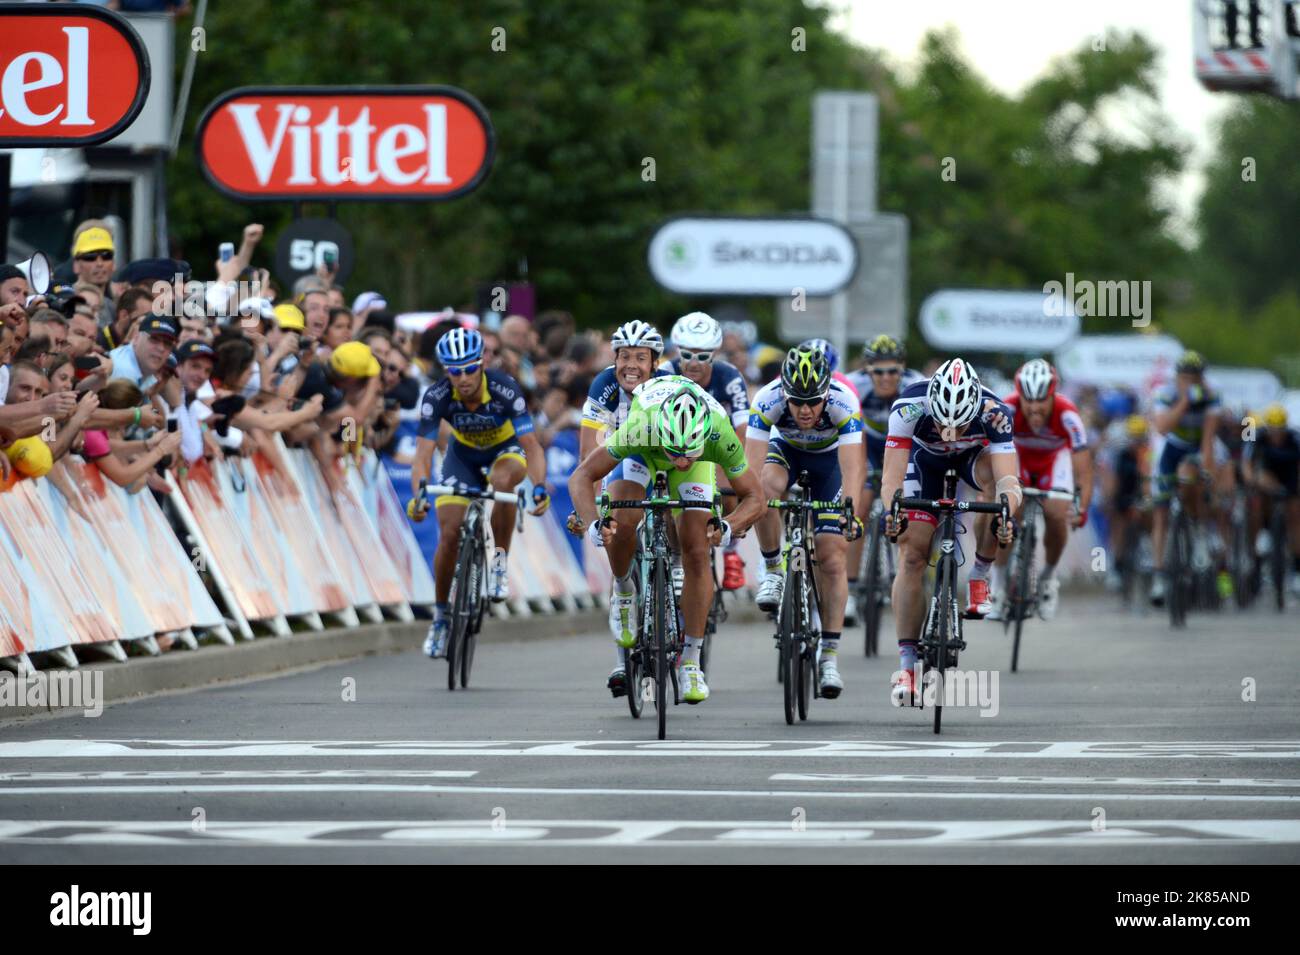 Peter Sagan takes the stage win ahead of Andre Greipel and Matthew Goss and Kenny Rober Van Hummel during Stage 6 of the 2012 Tour de France  Stock Photo